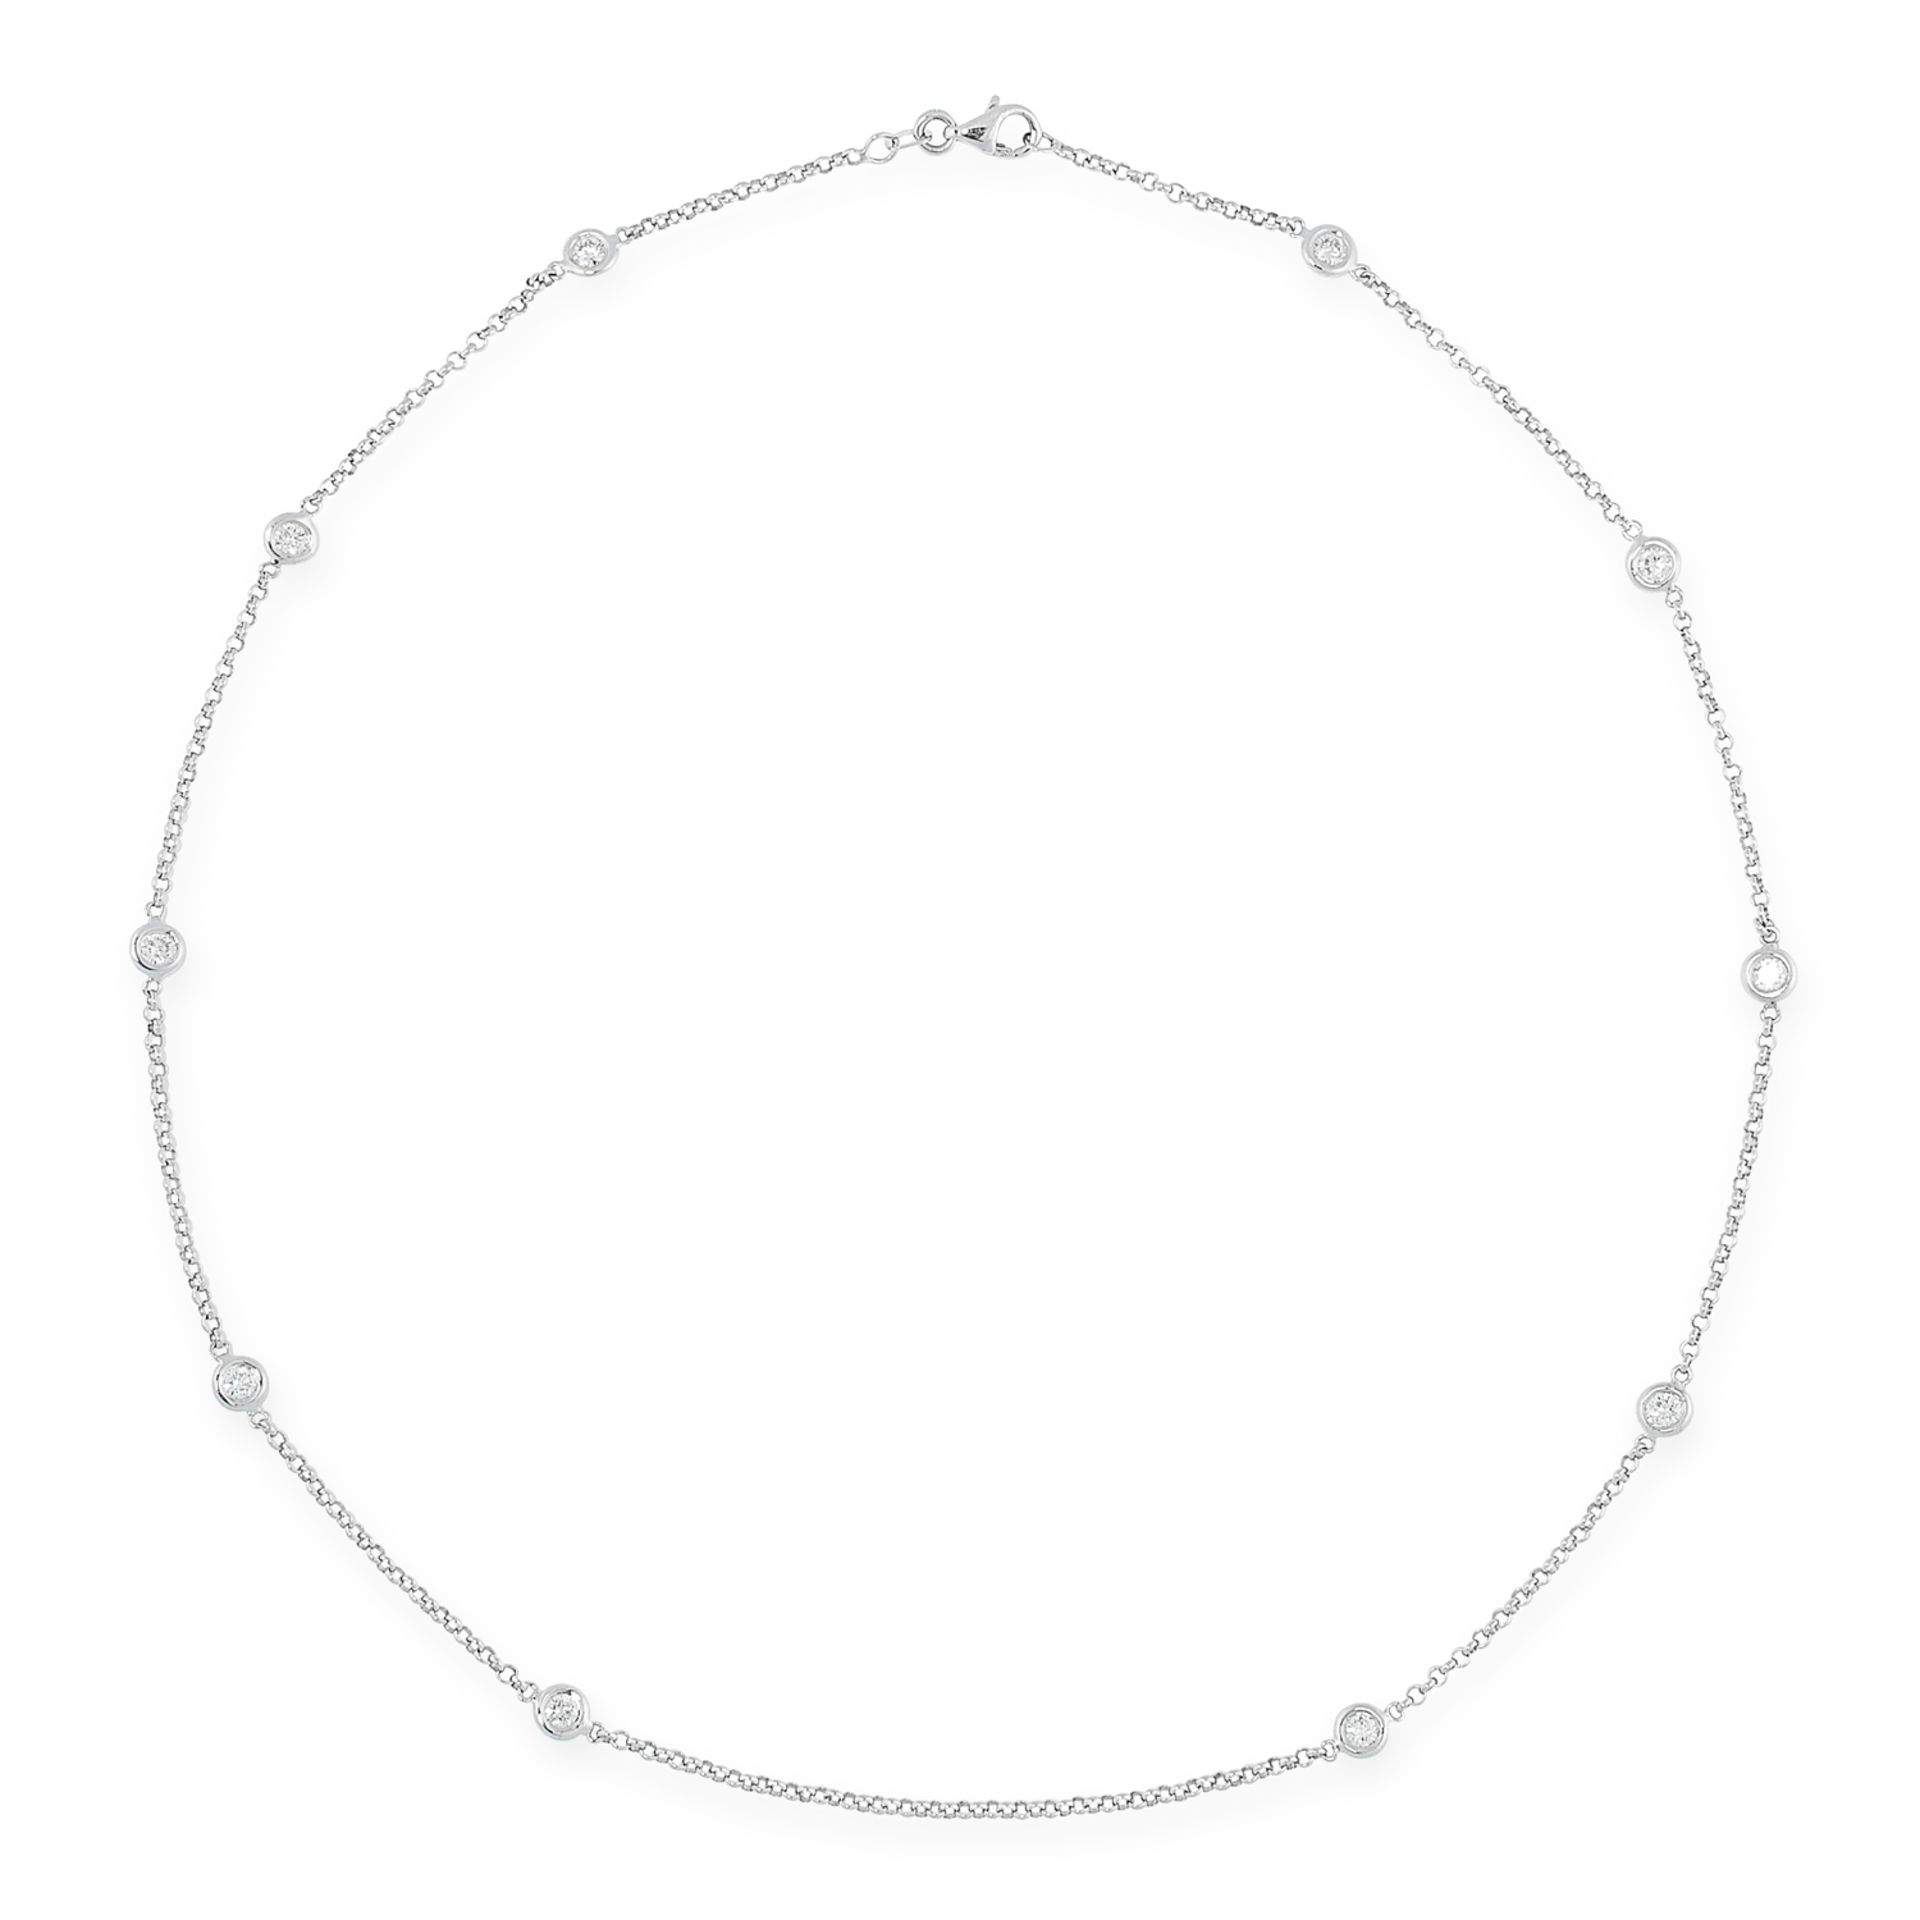 A DIAMOND CHAIN NECKLACE in the manner of Tiffany & Co Diamonds by the Yard, set with 1.20 carats of